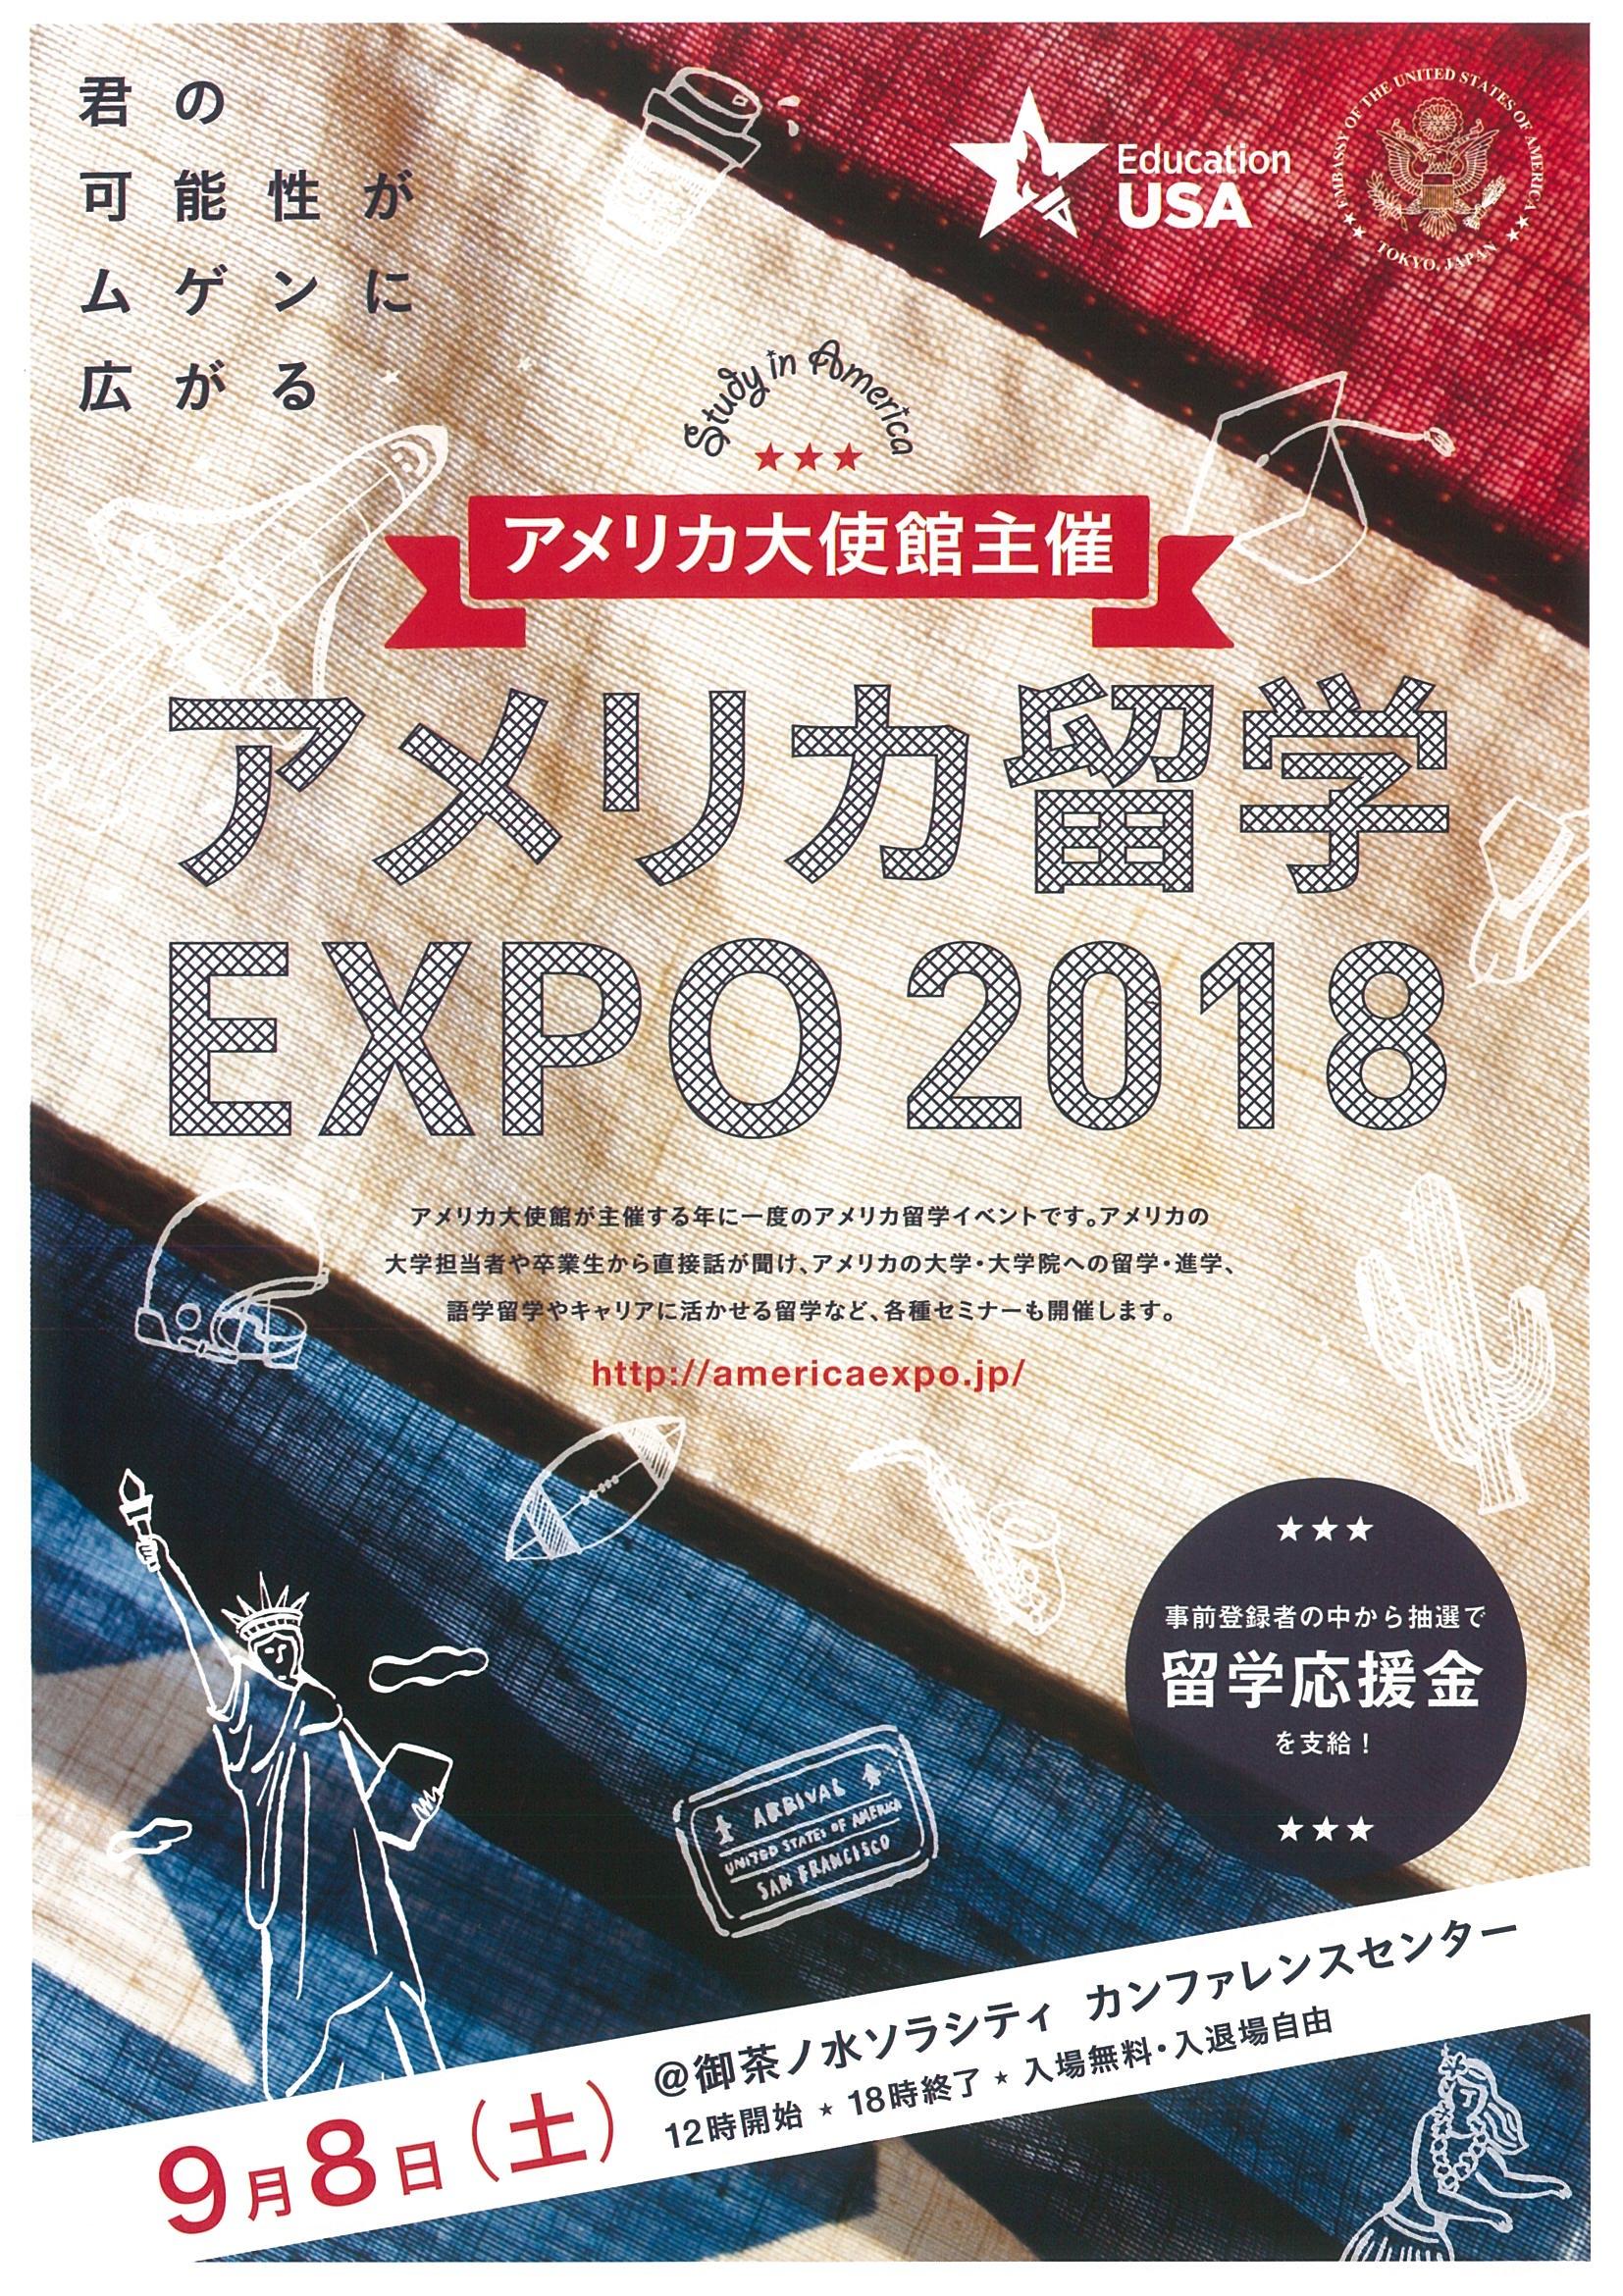 poster_expo2018